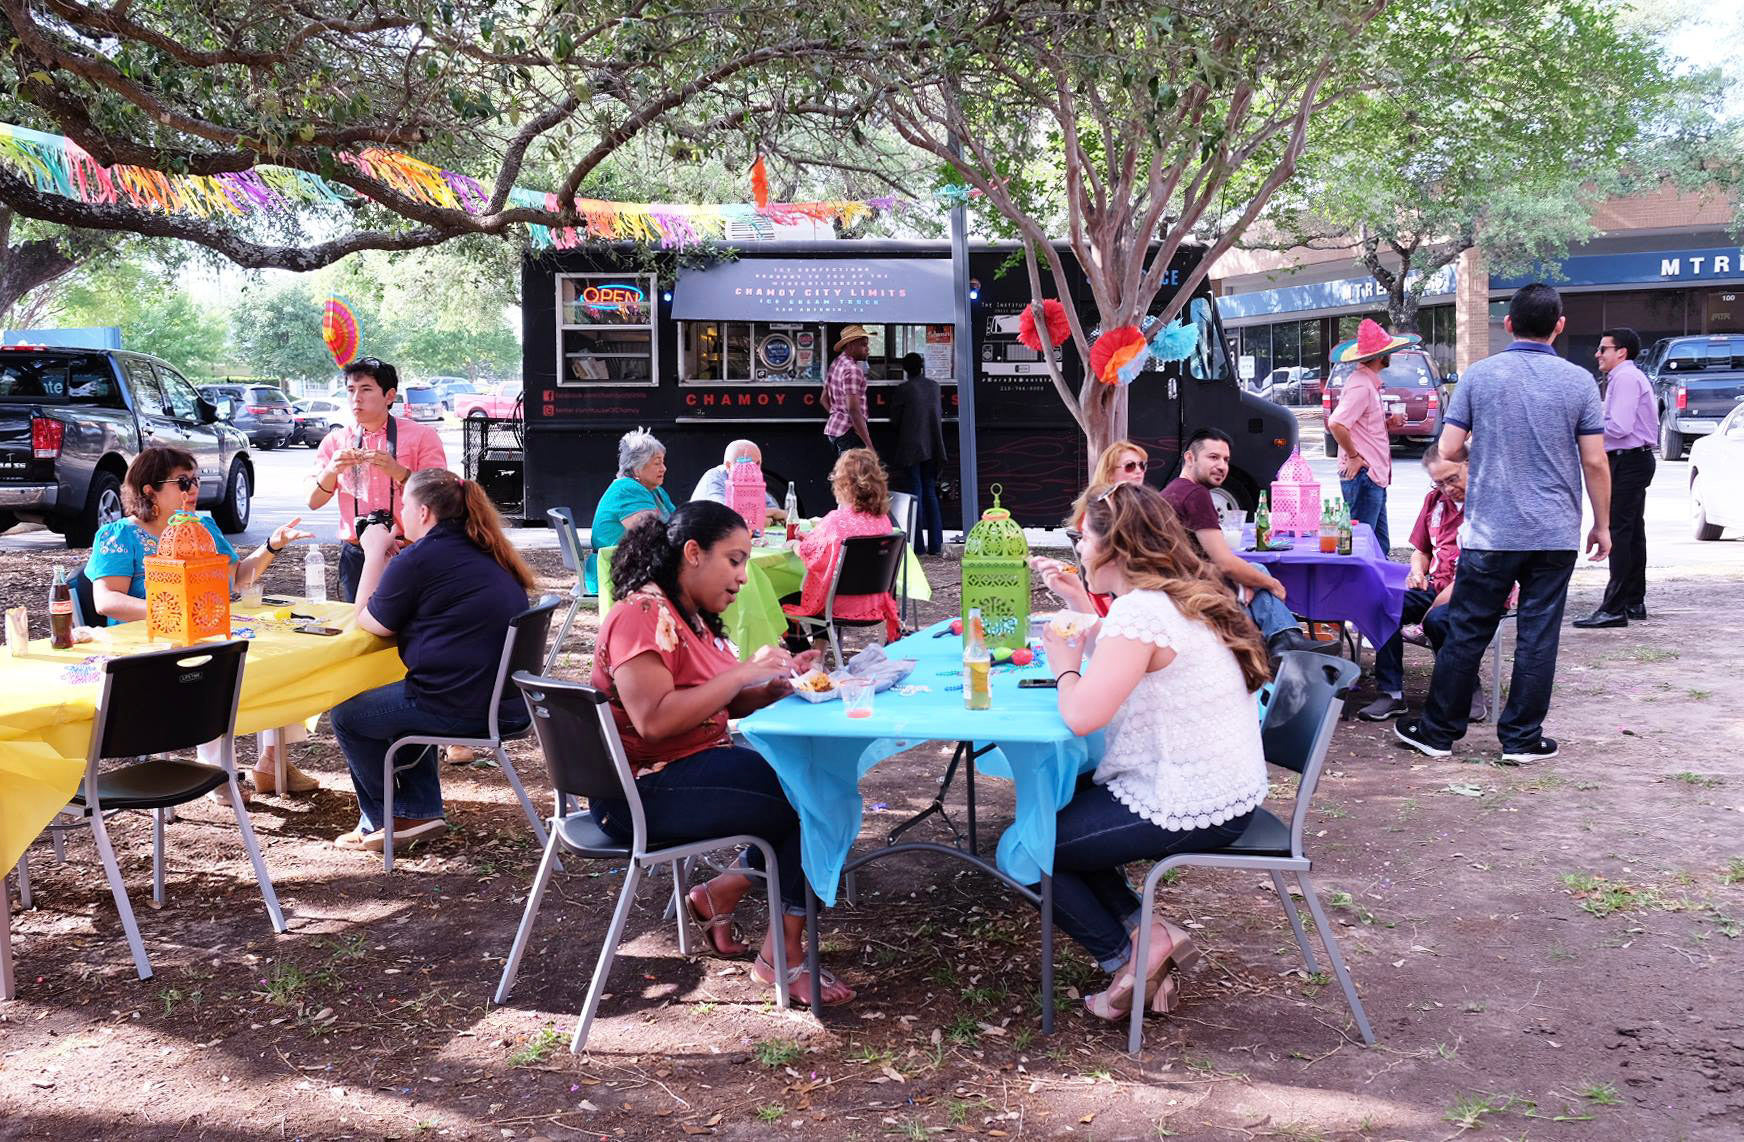 How to Book a Food Truck for Your Next Event in San Antonio